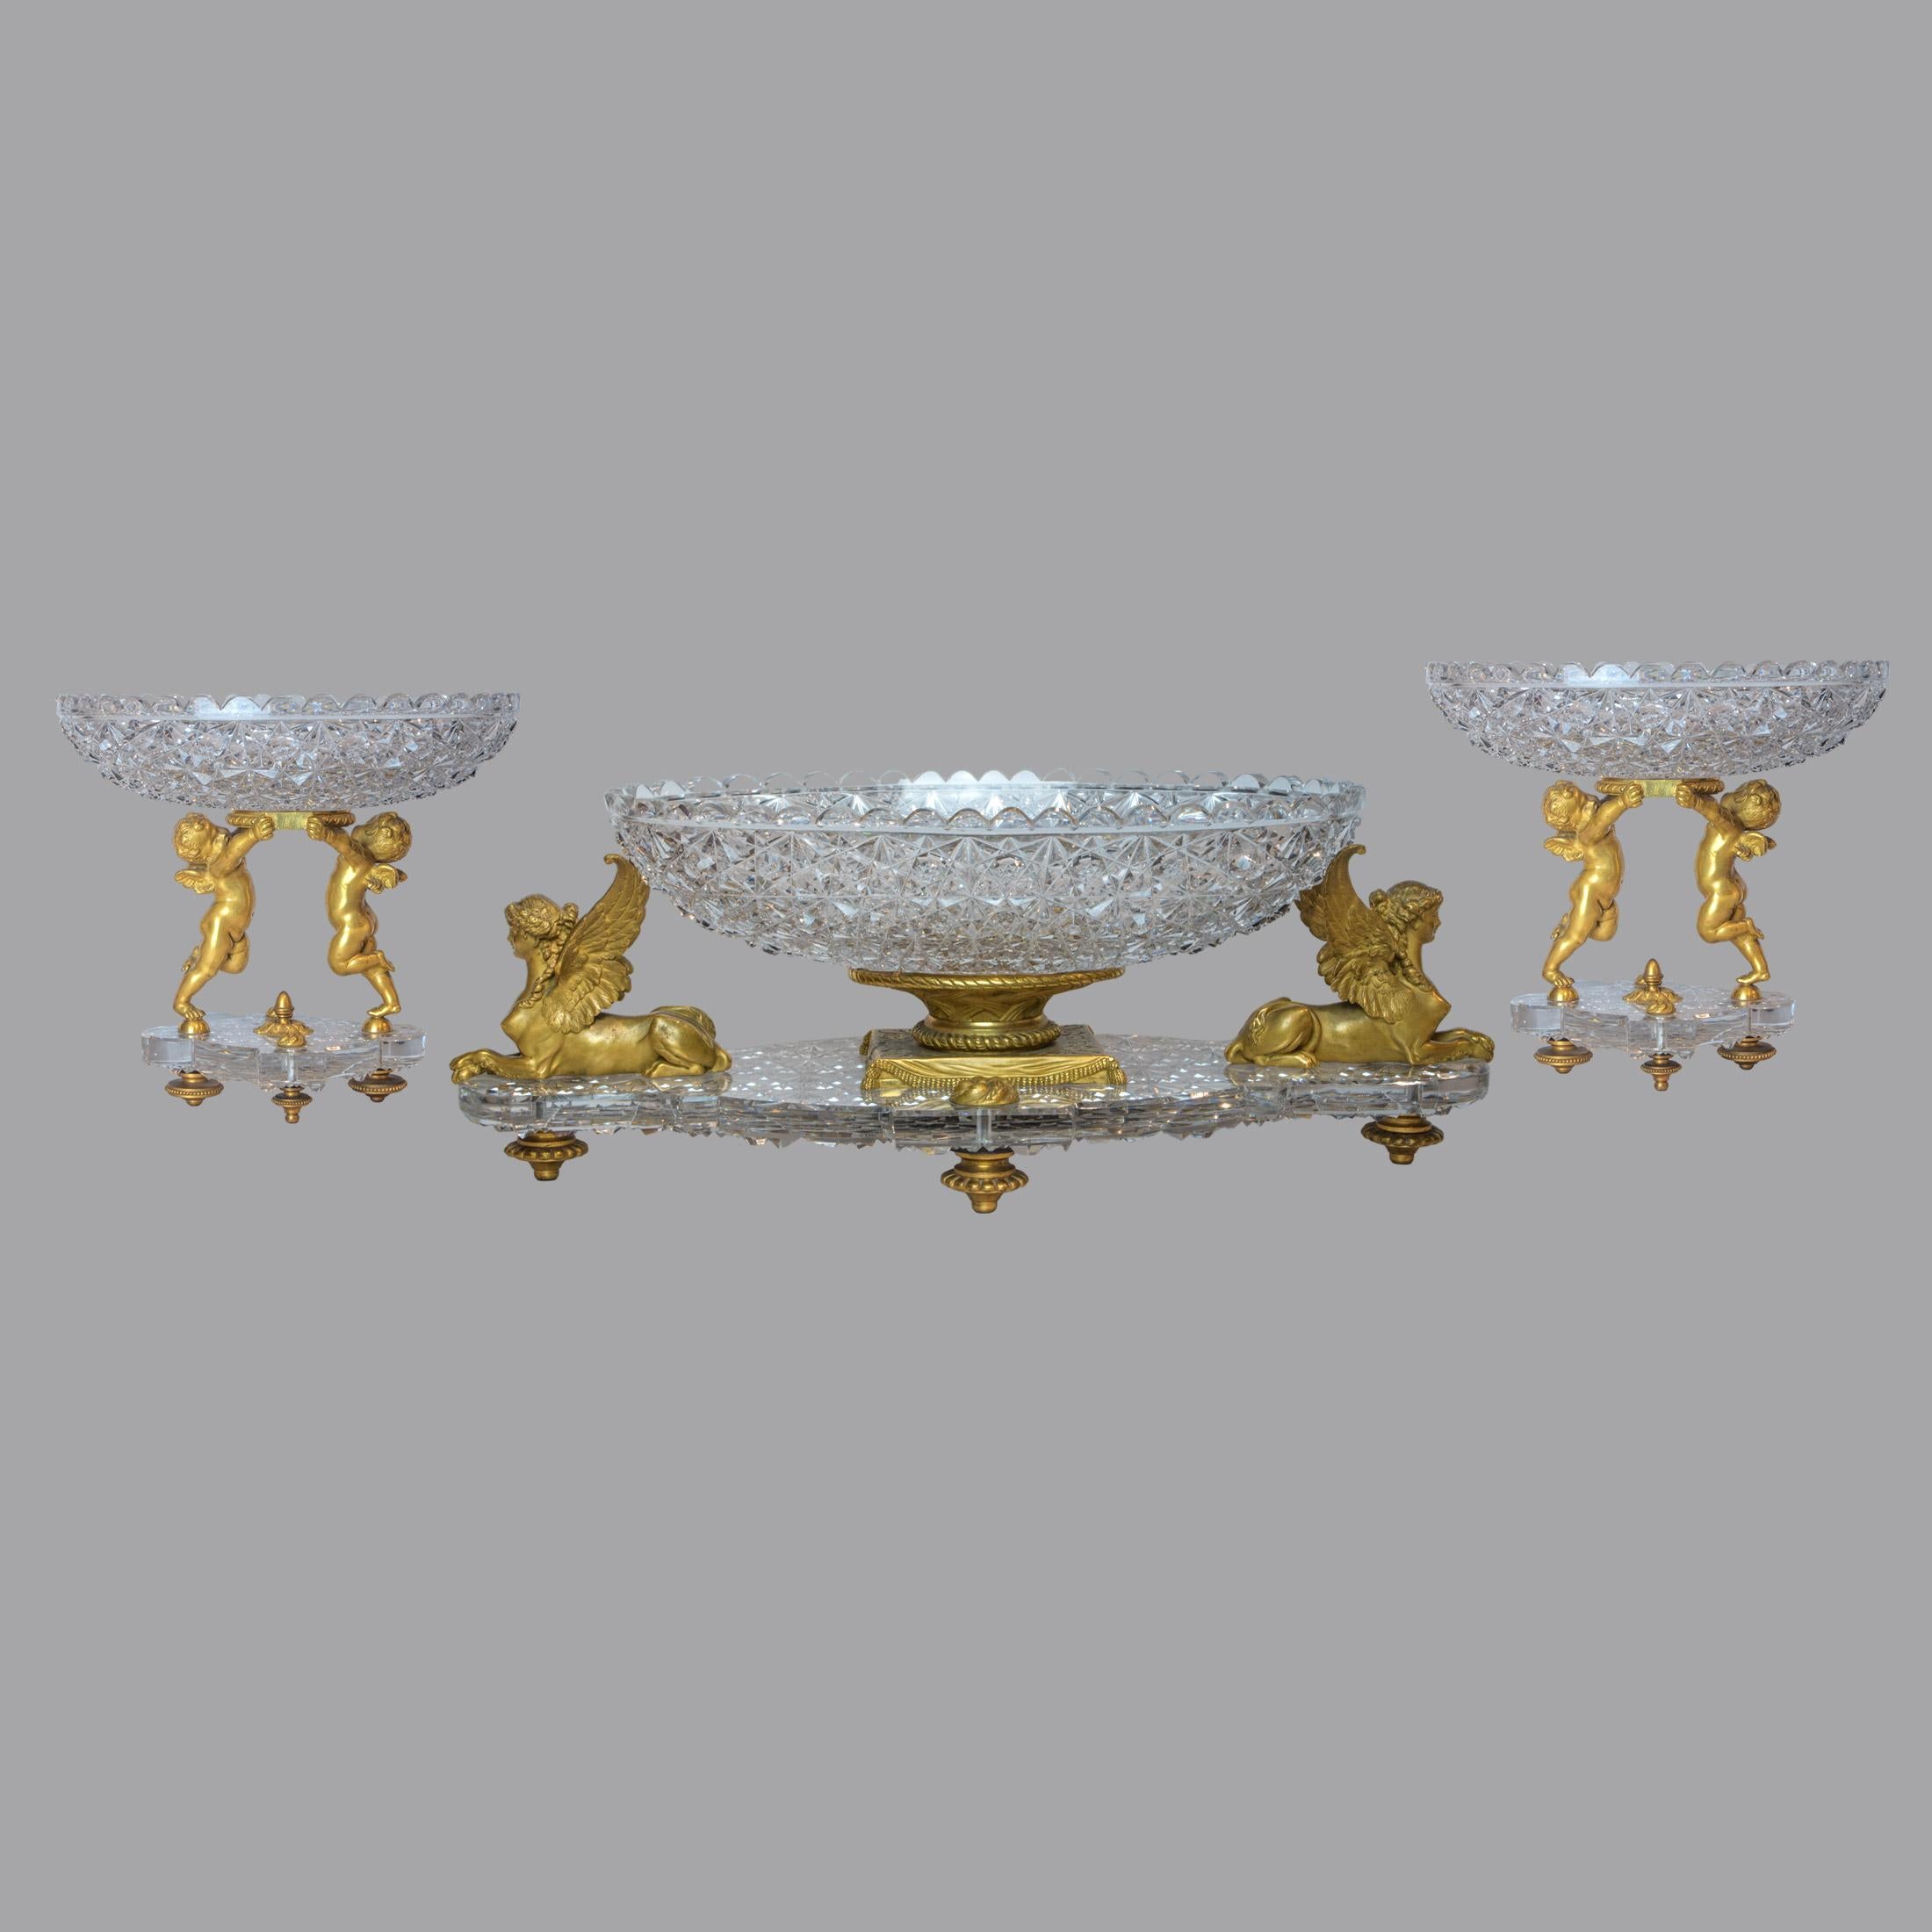 Highly important  French Ormolu and  Russian Cut-Crystal Three-piece Garniture by Baccarat Paris, late 19th century 
Comprising a center bowl flanked by sphinxes and a pair of tazze each supported by a pair of putti, stamped Baccarat  
Dimension: 19